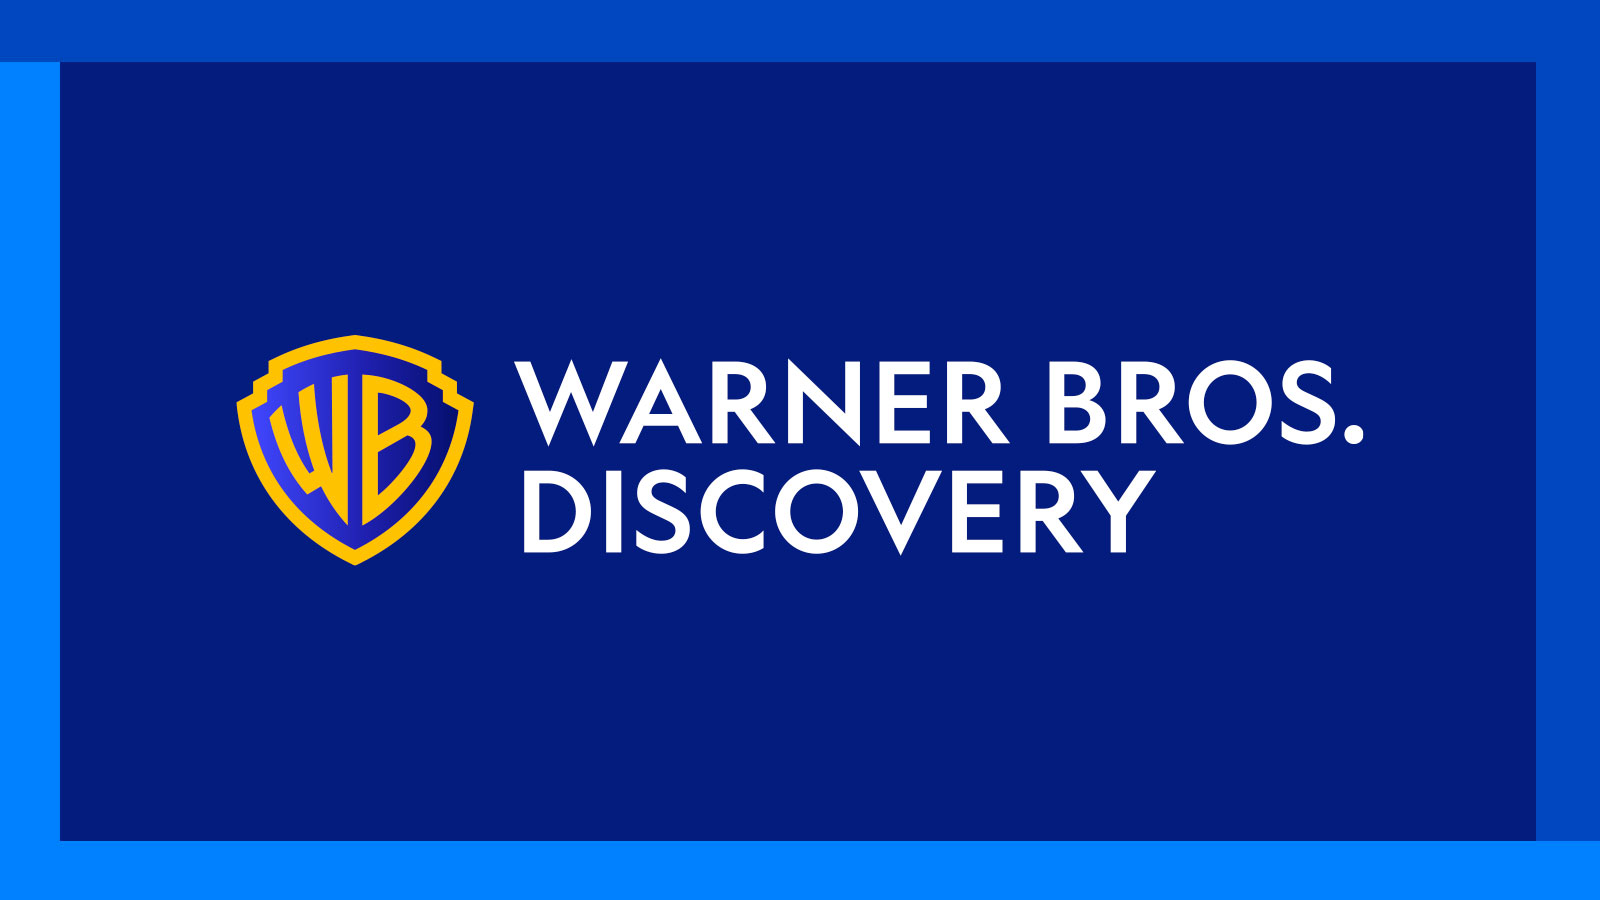 Warner Bros. Discovery Announces Expansion Plan for Warner Bros